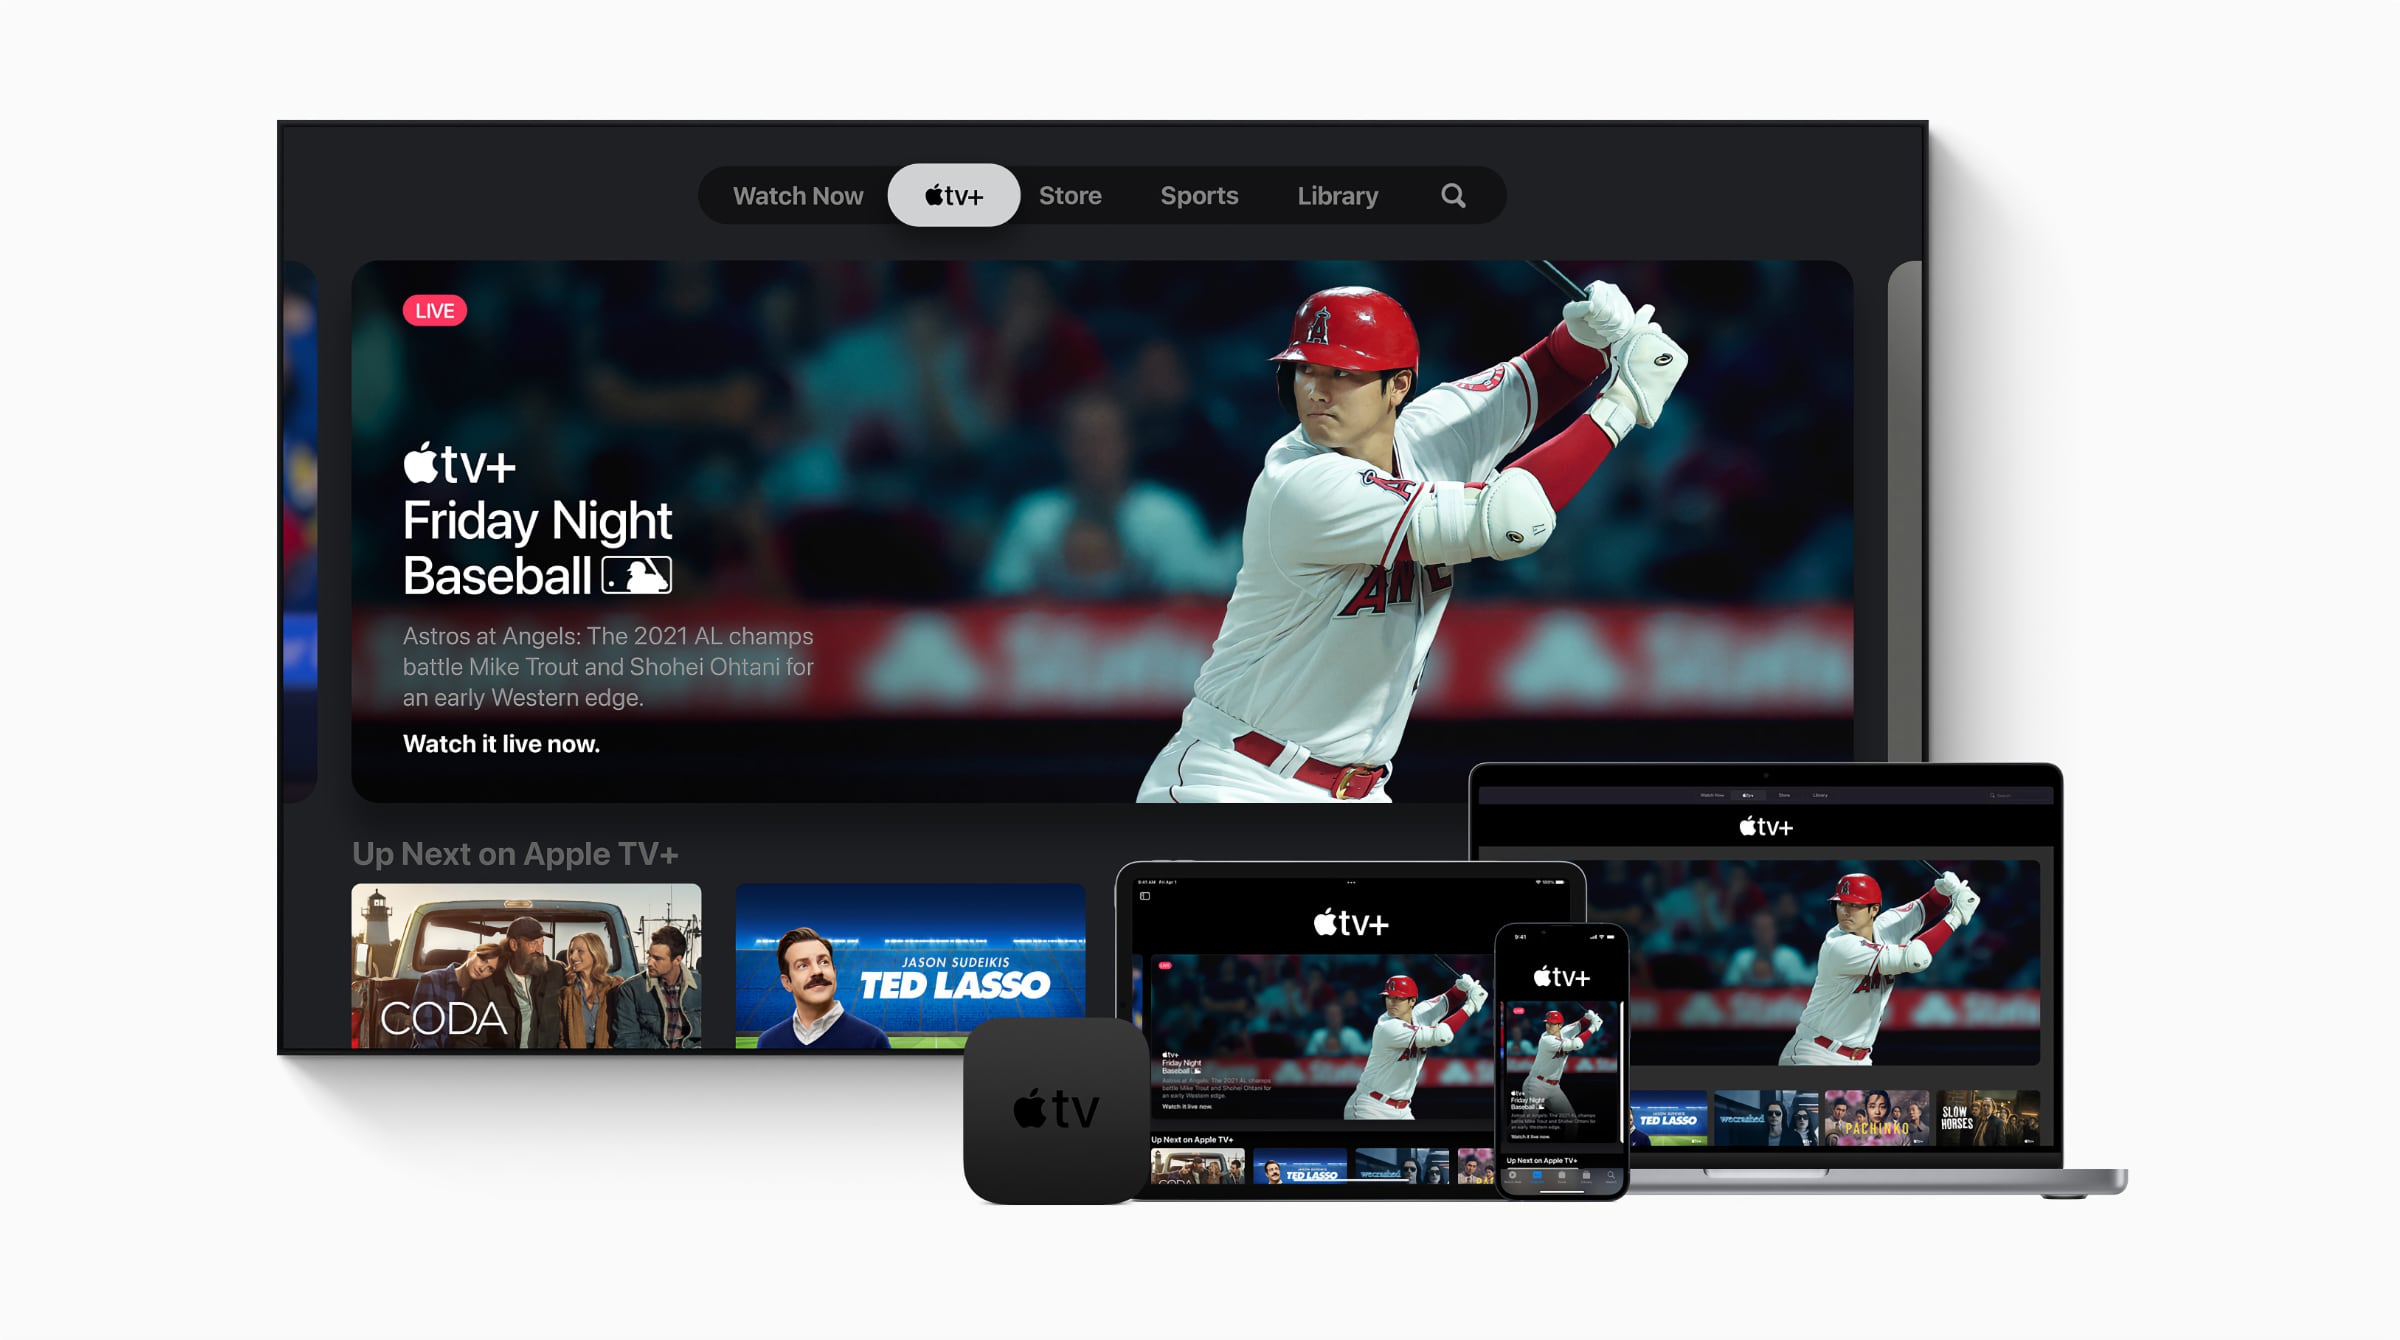 Apple TVs MLS Season Pass launches in February for $15/month